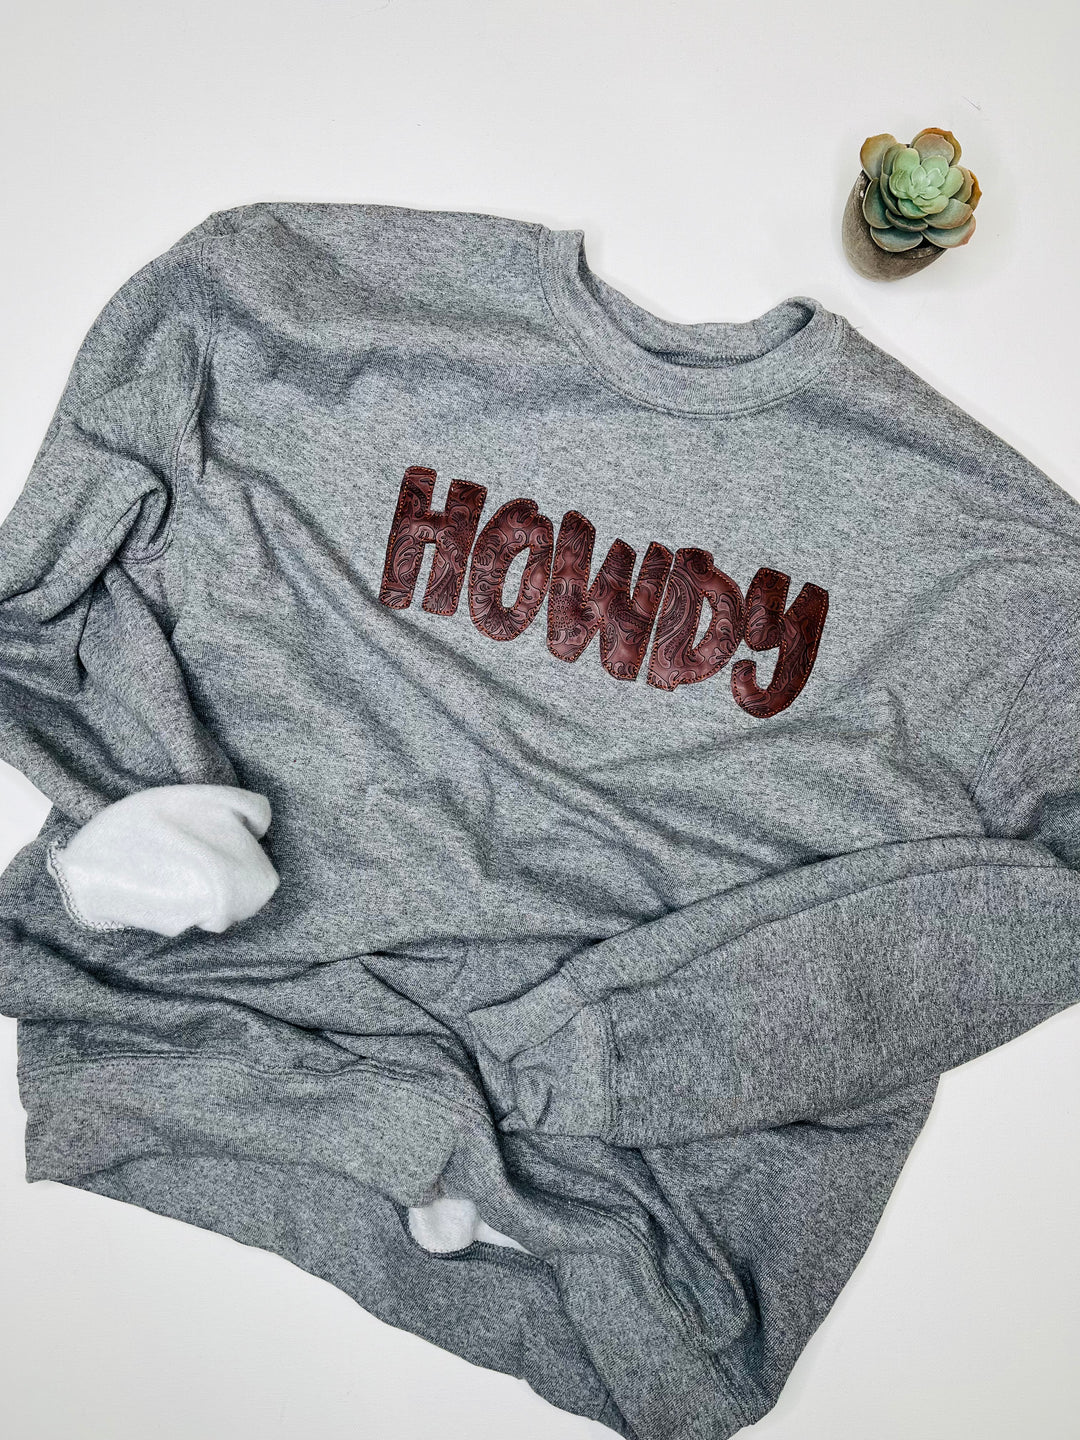 Howdy Tooled Leather Graphic Sweatshirt